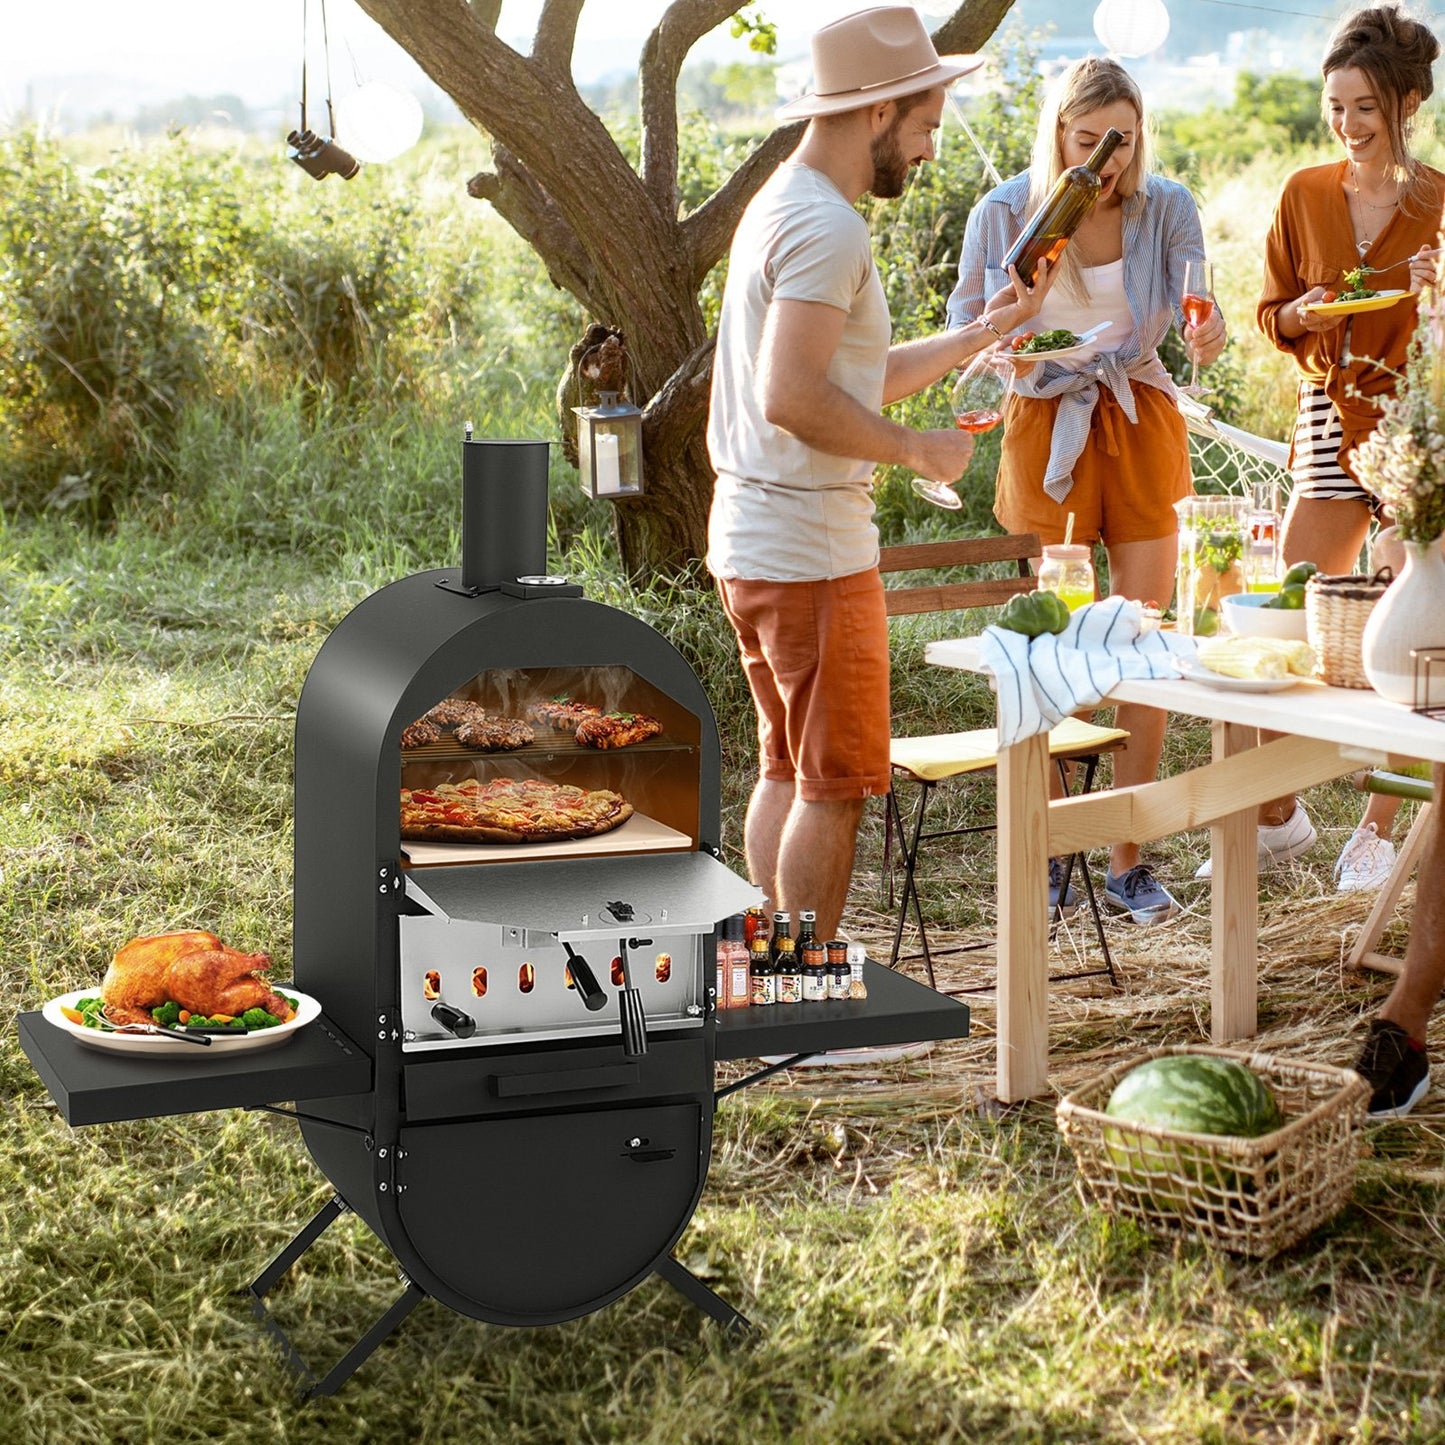 Outdoor Pizza Oven with 600D Oxford Fabric Cover  12" Pizza Stone and Cooking Grill, Black